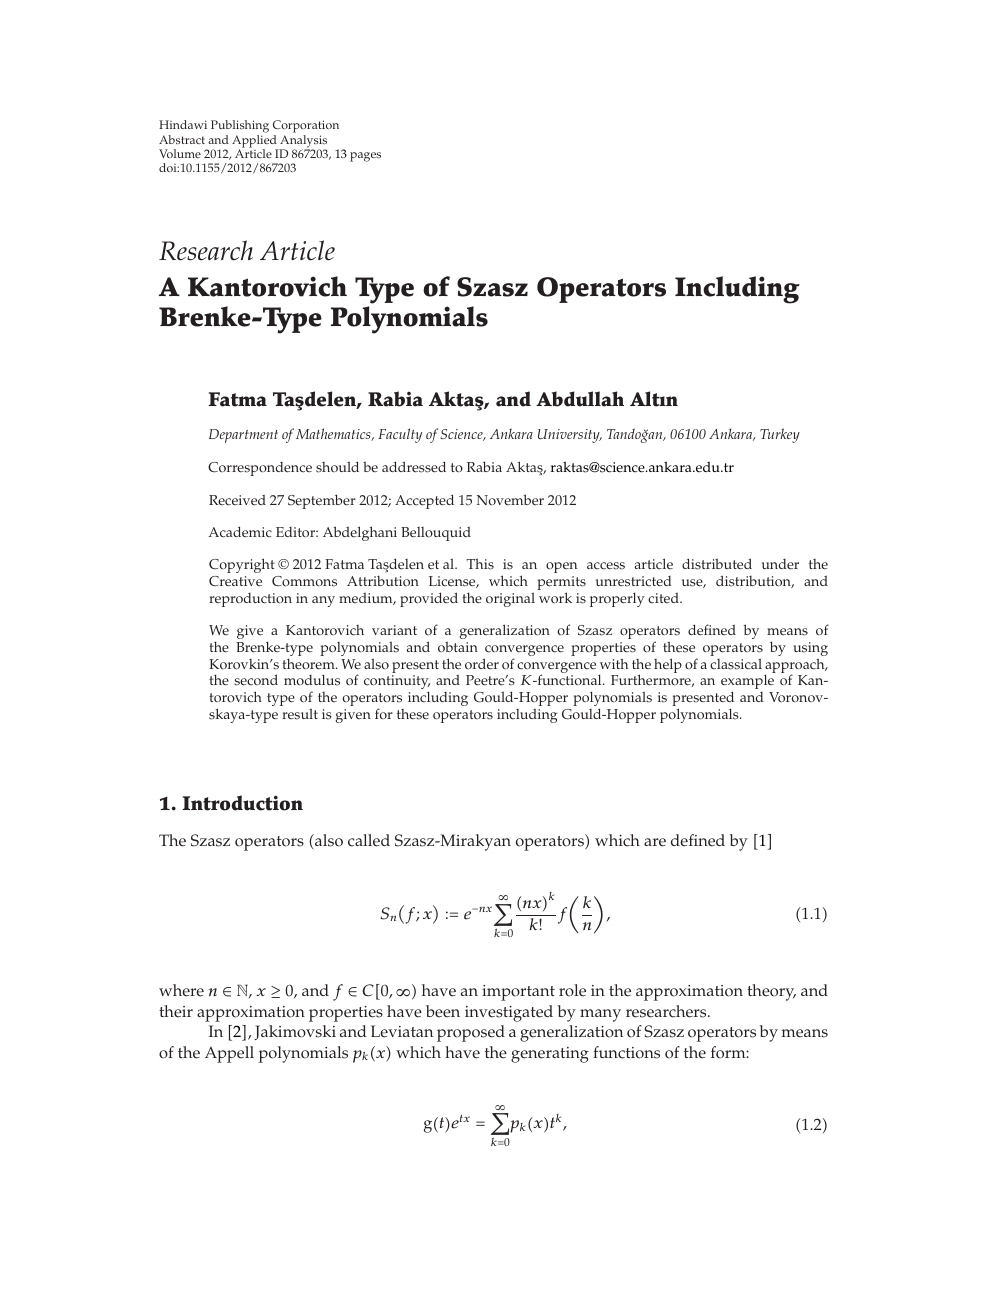 A Kantorovich Type Of Szasz Operators Including Brenke Type Polynomials Topic Of Research Paper In Mathematics Download Scholarly Article Pdf And Read For Free On Cyberleninka Open Science Hub